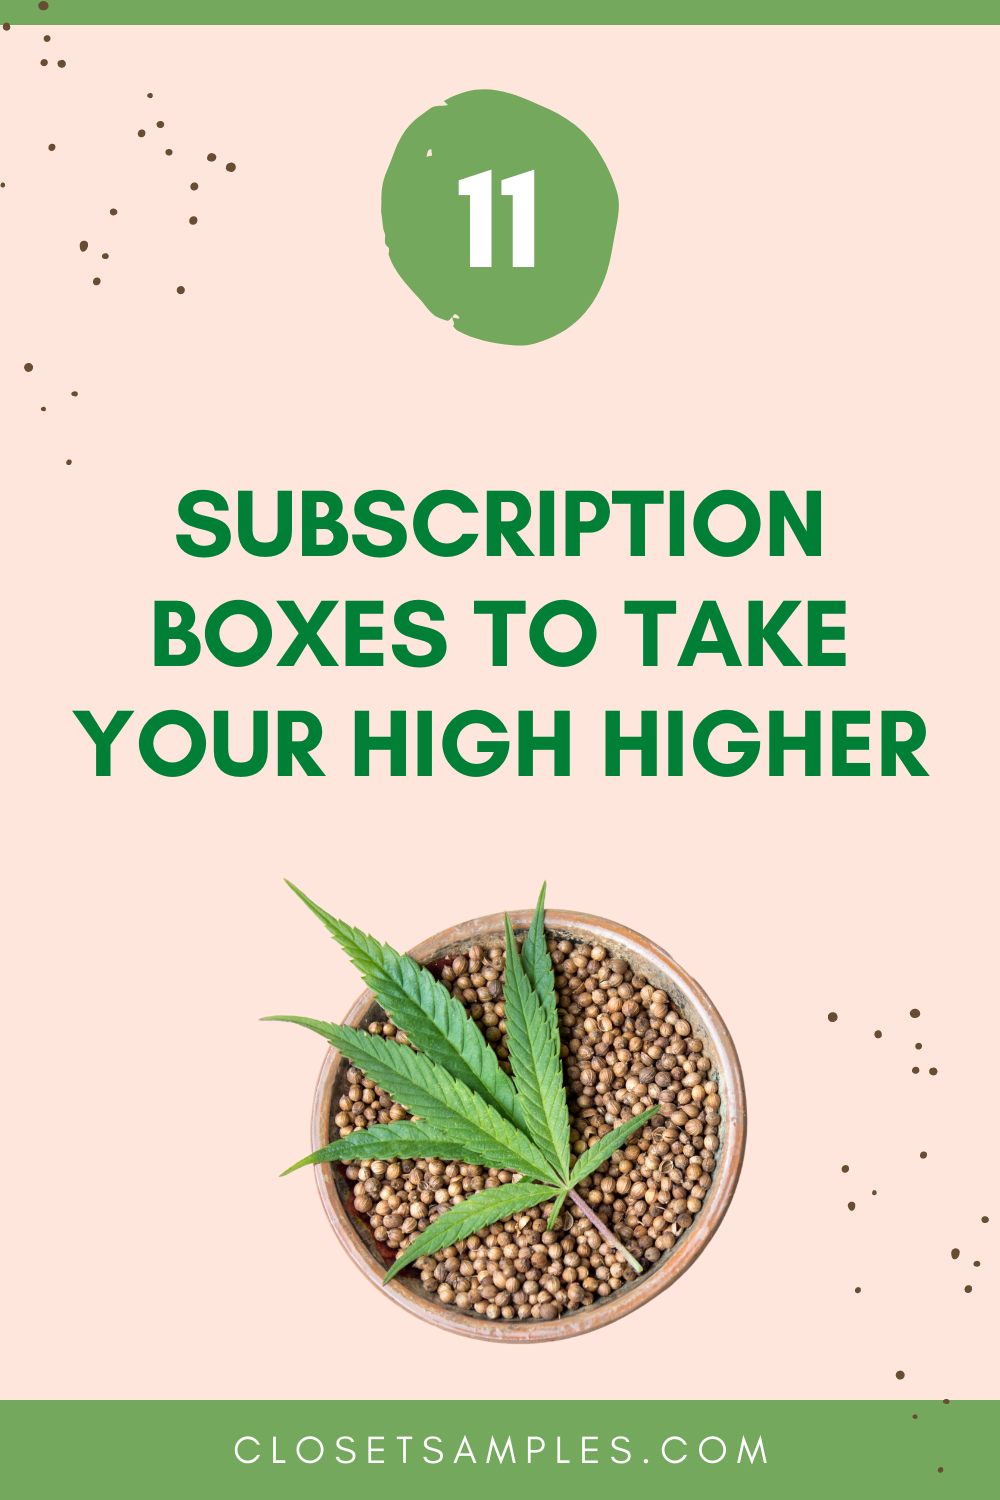 11-Weed-Subscription-Boxes-to-Take-Your-High-Higher-Cratejoy-Closetsamples-Pinterest.png